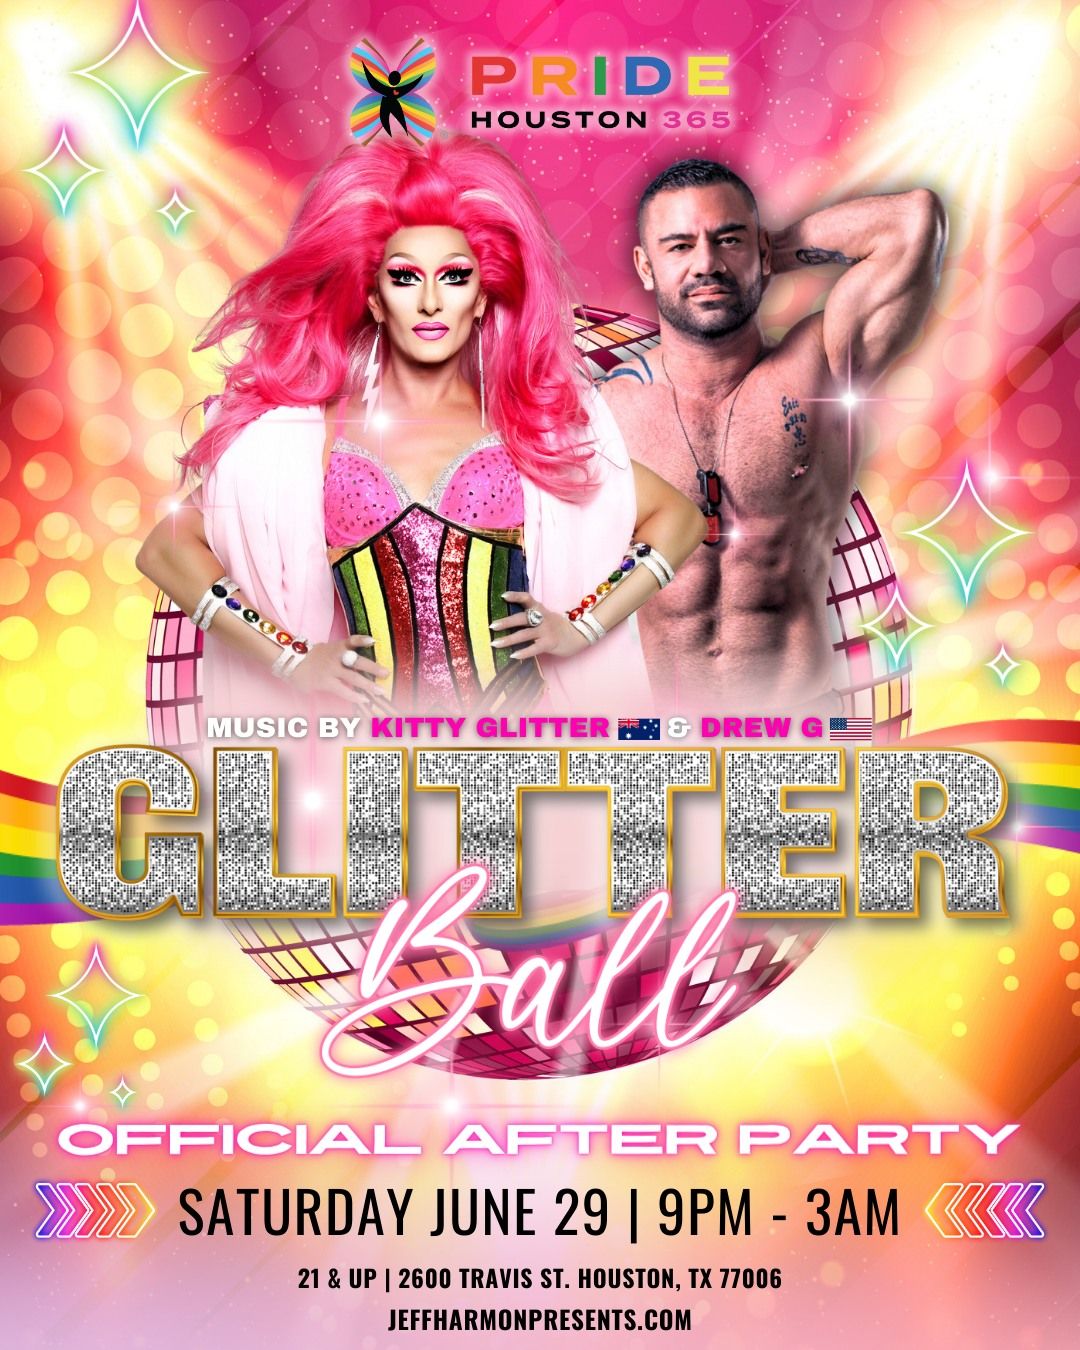 GLITTERBALL - THE OFFICIAL HOUSTON PRIDE AFTERPARTY WITH DJ'S KITTY GLITTER & DREW G